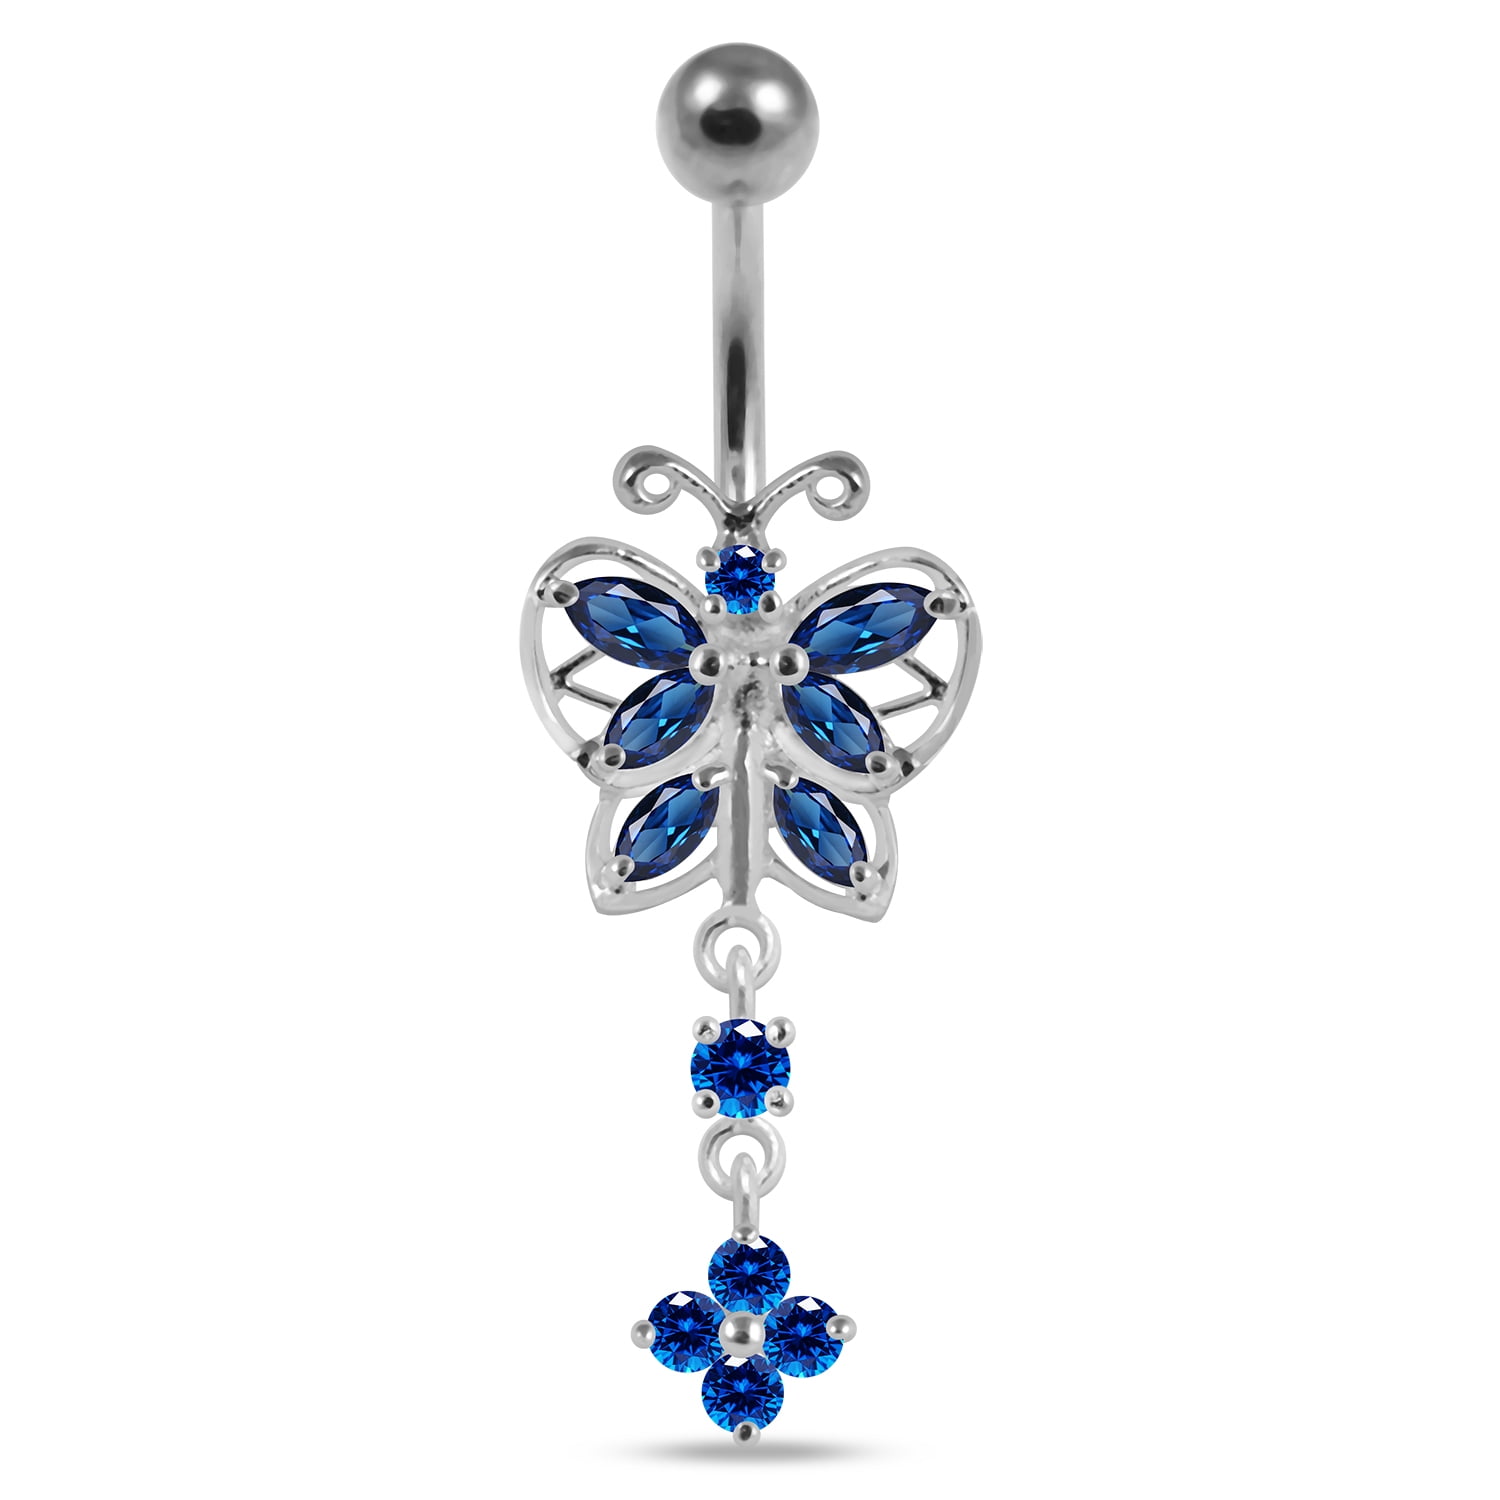 Multi Colored CZ Stone Triple Butterfly Dangling 925 Sterling Silver Belly Button Piercing Ring Jewelry